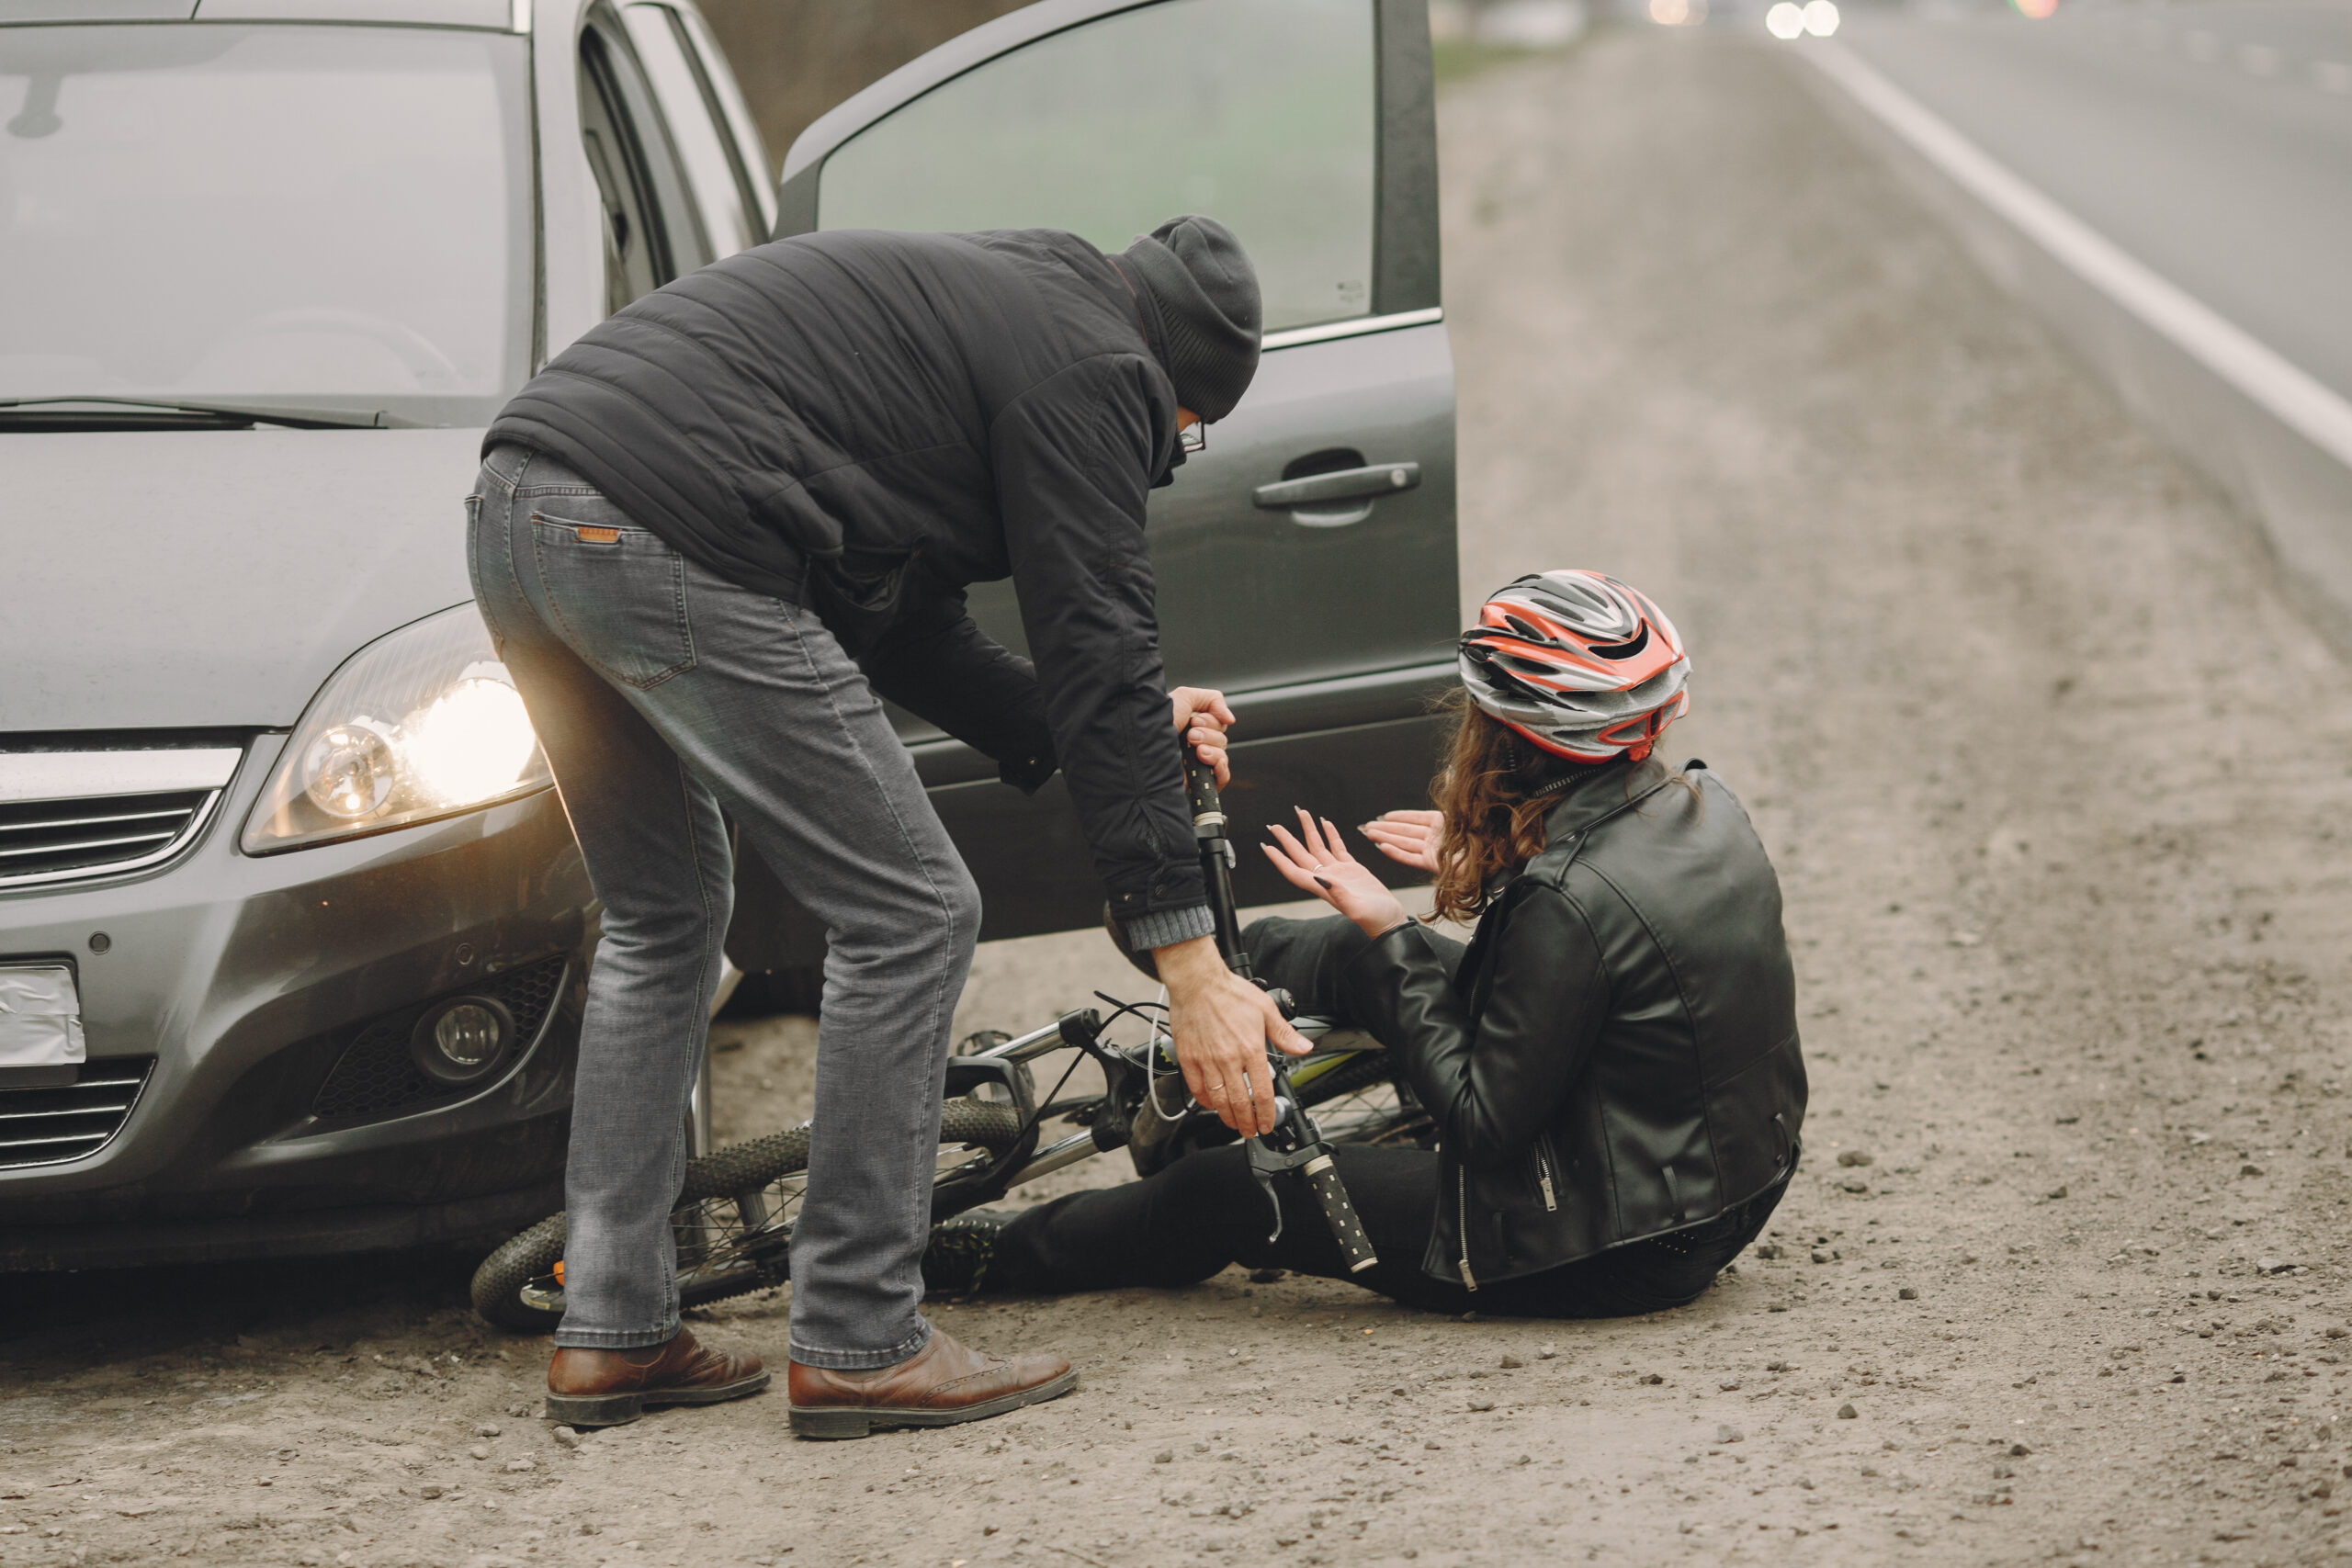 A good samaritan driver stops to help an injured bicyclist on the side of the road.